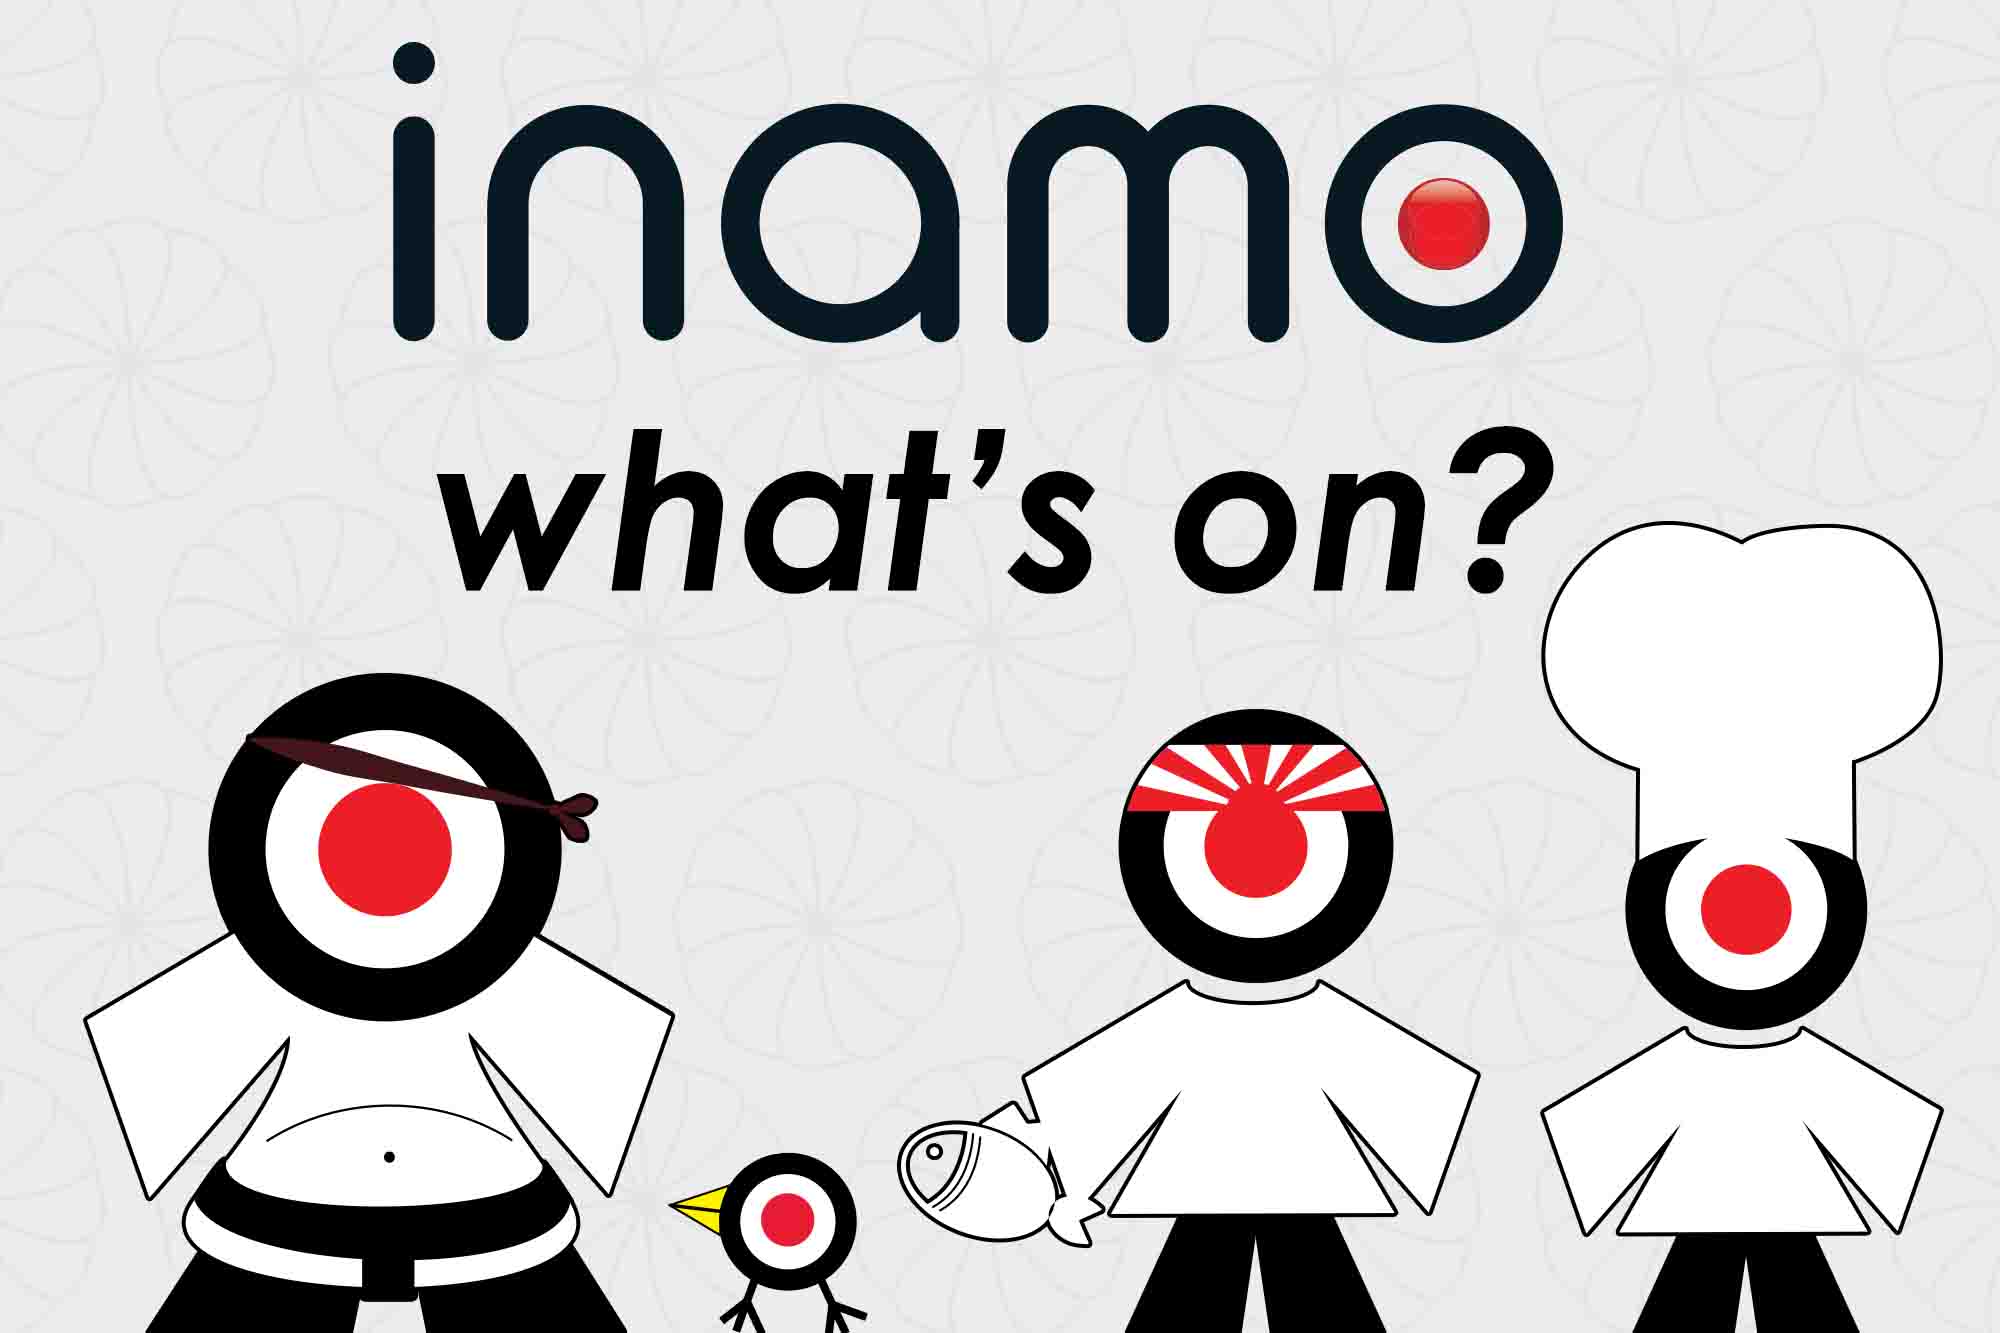 What's on at inamo?